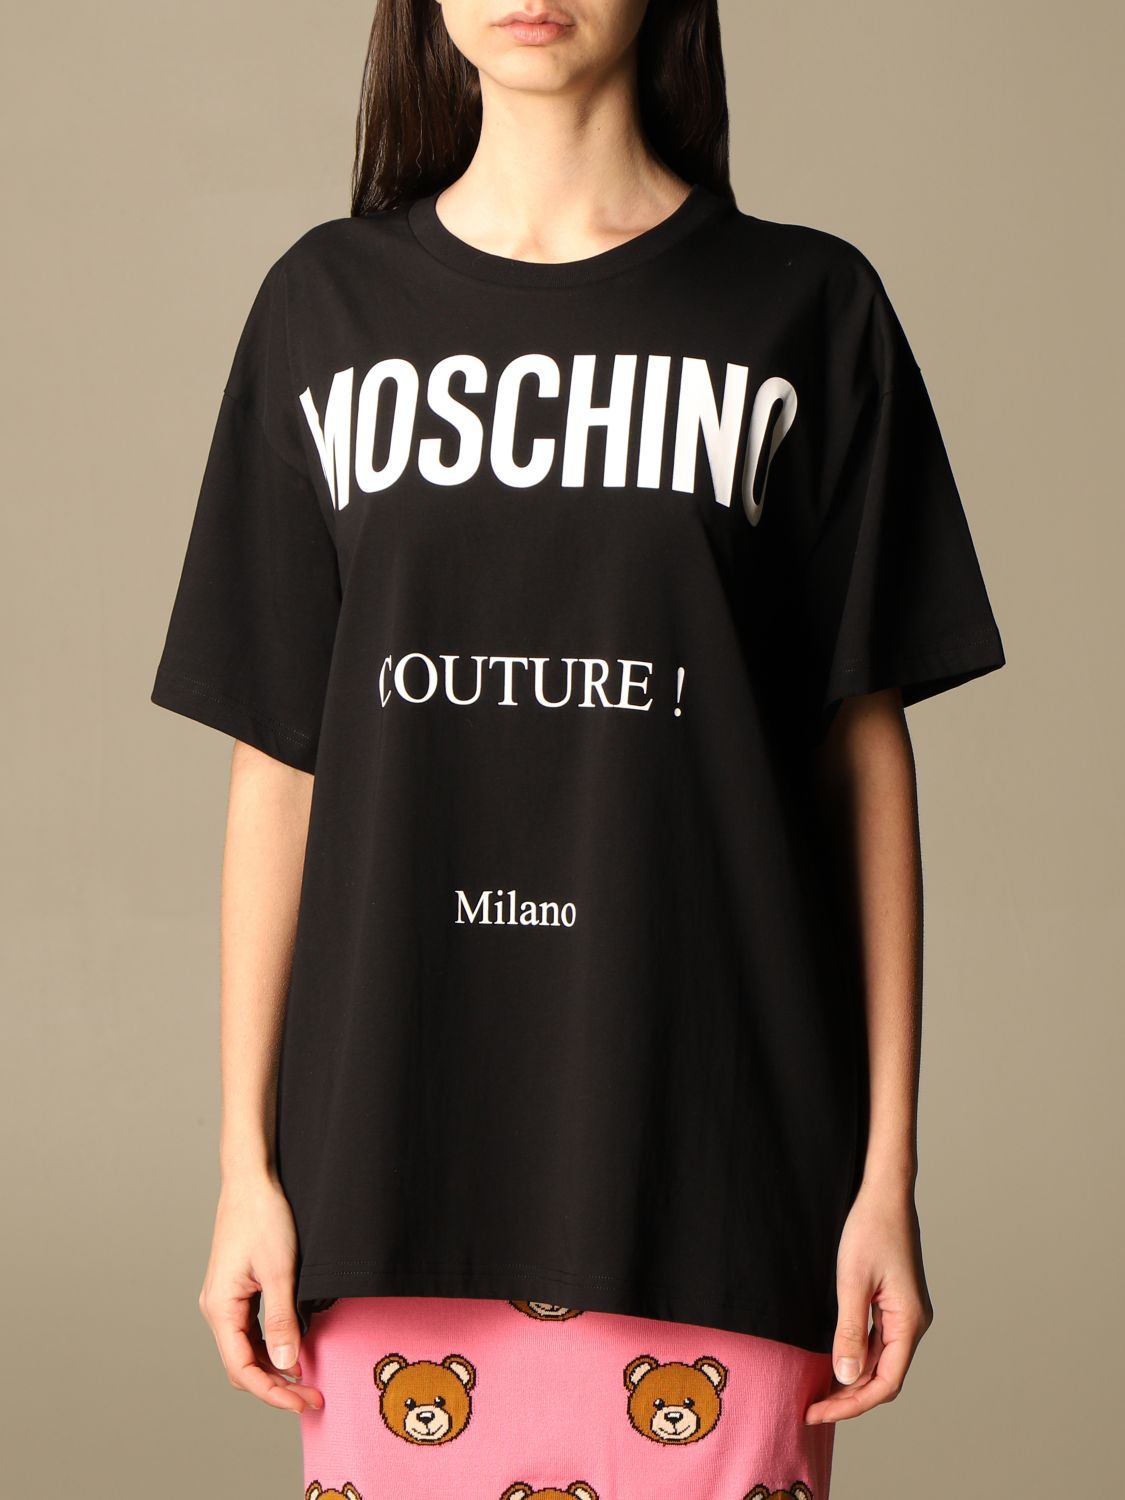 T-Shirt Moschino Couture 0716 540 Giglio EN